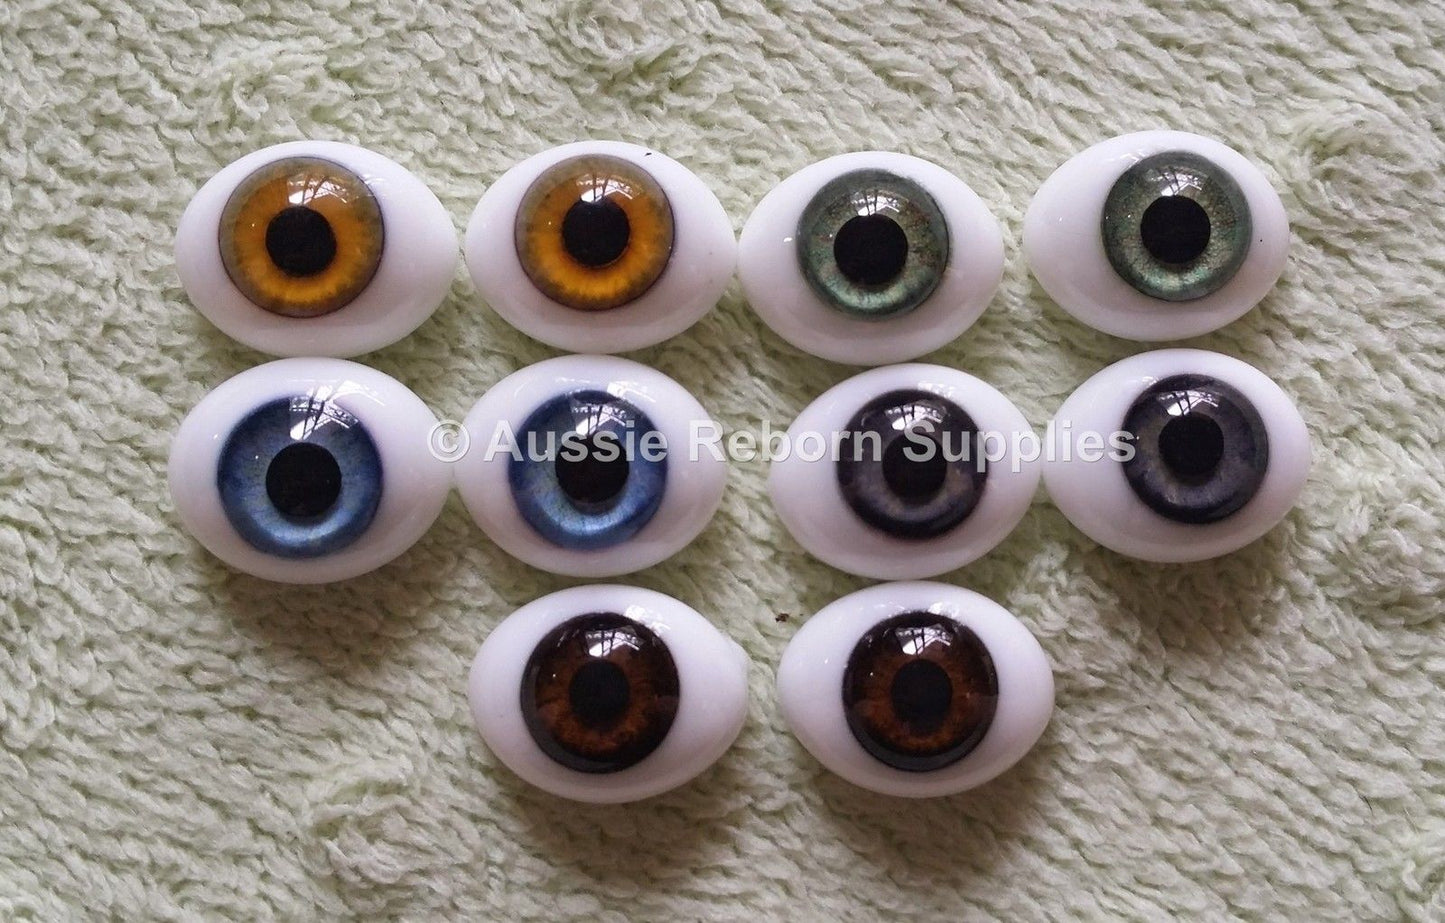 20mm Meadow Green Oval Glass Eyes Reborn Baby Doll Making Supplies